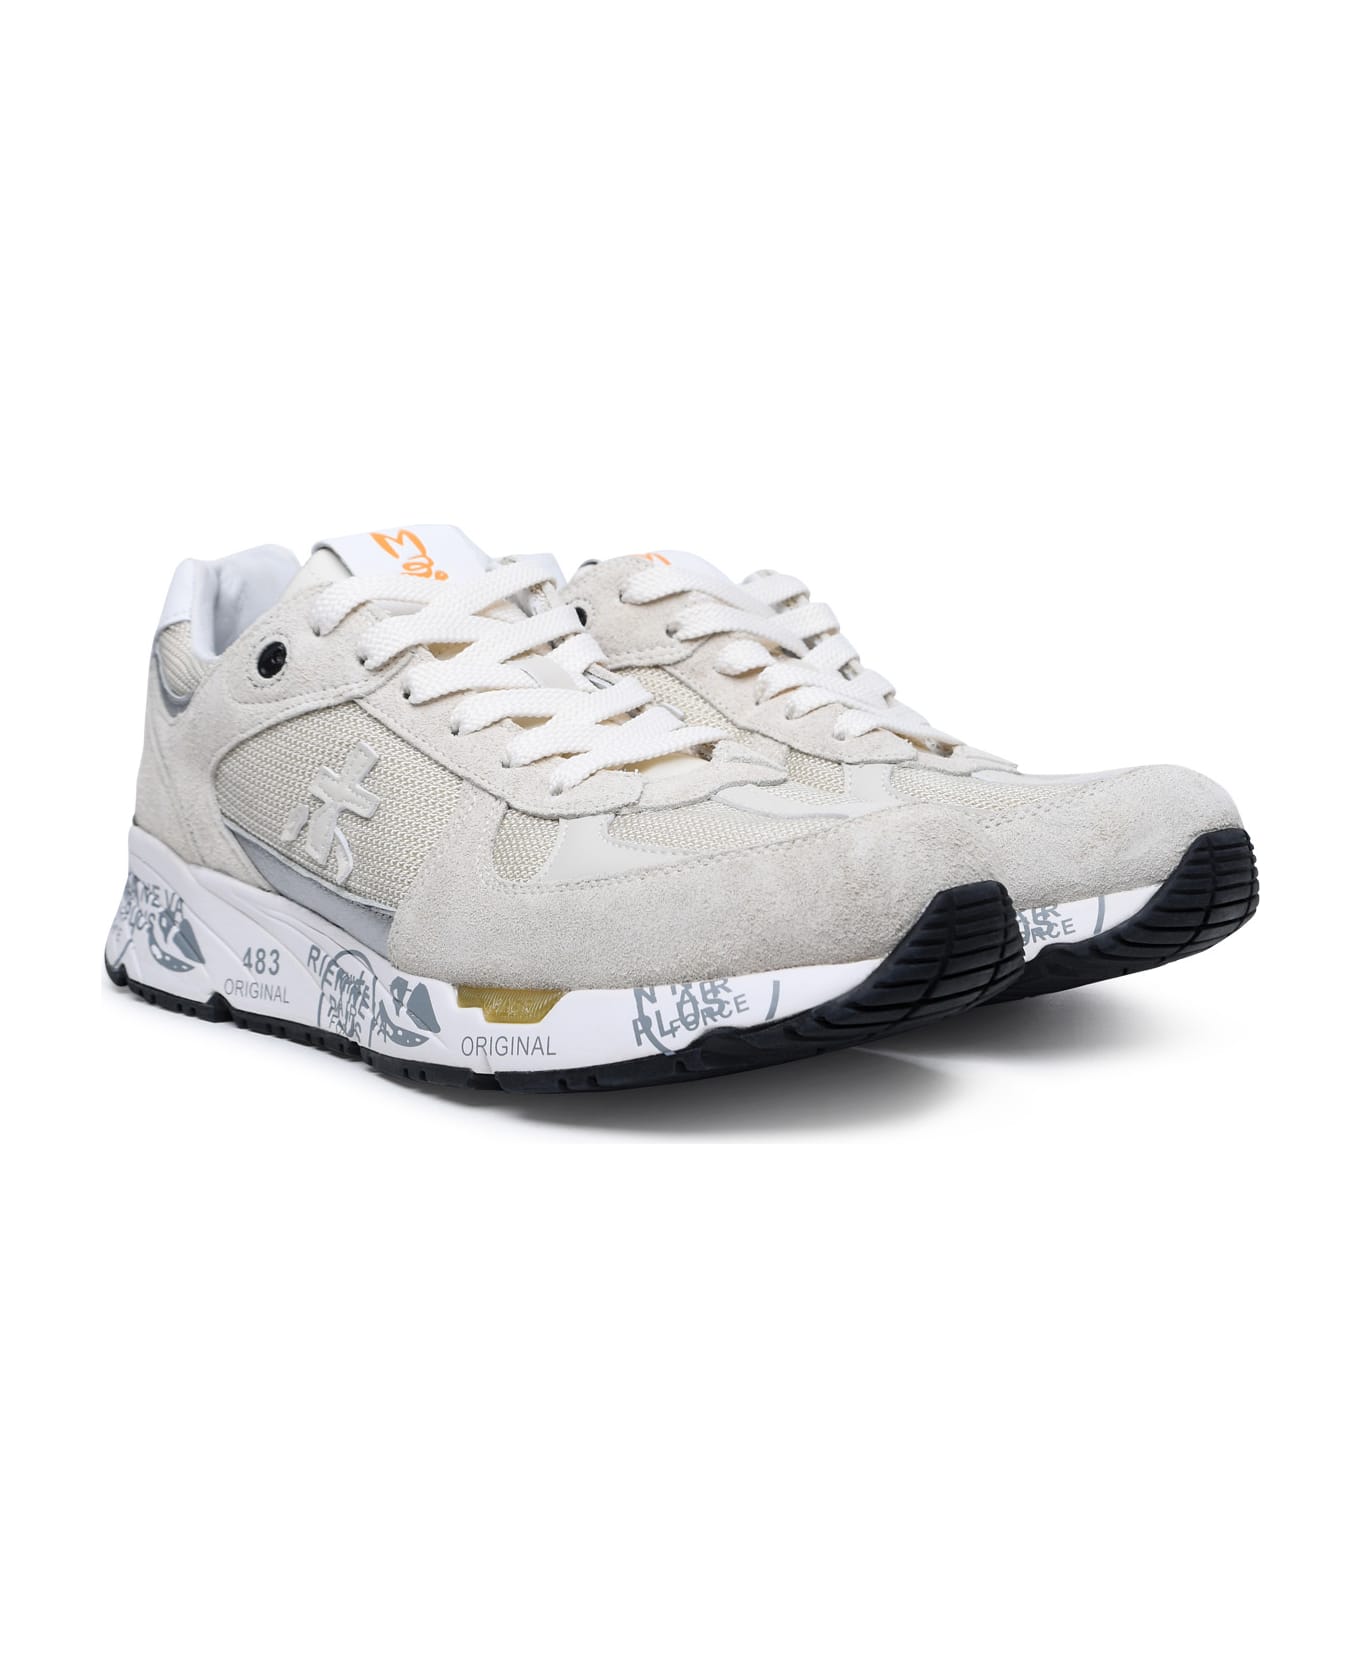 Premiata 'mase' Sneakers In Leather And Cream Fabric - Beige スニーカー